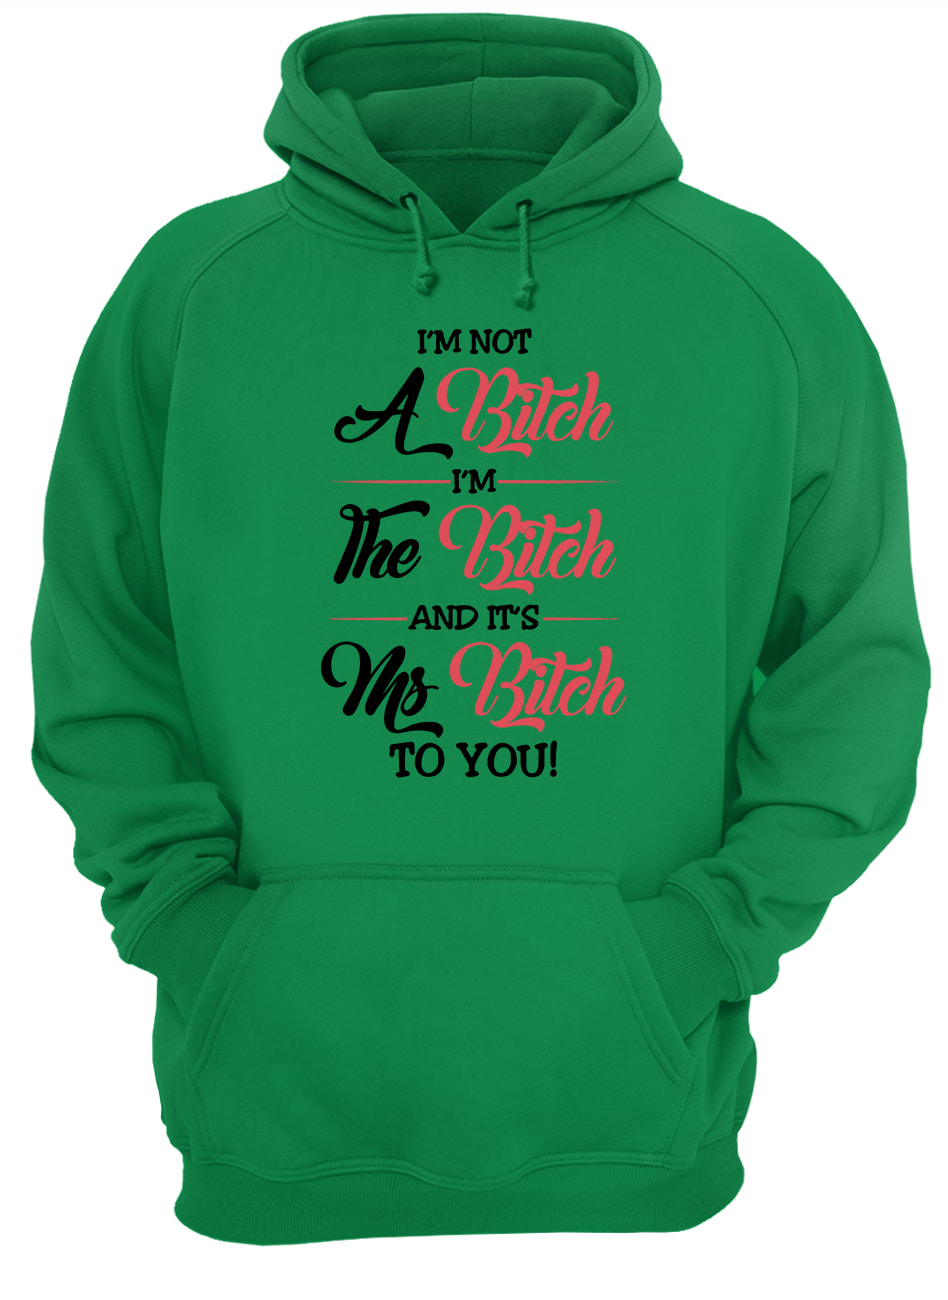 I'm not a bitch I'm the bitch and it's ms bitch to you hoodie